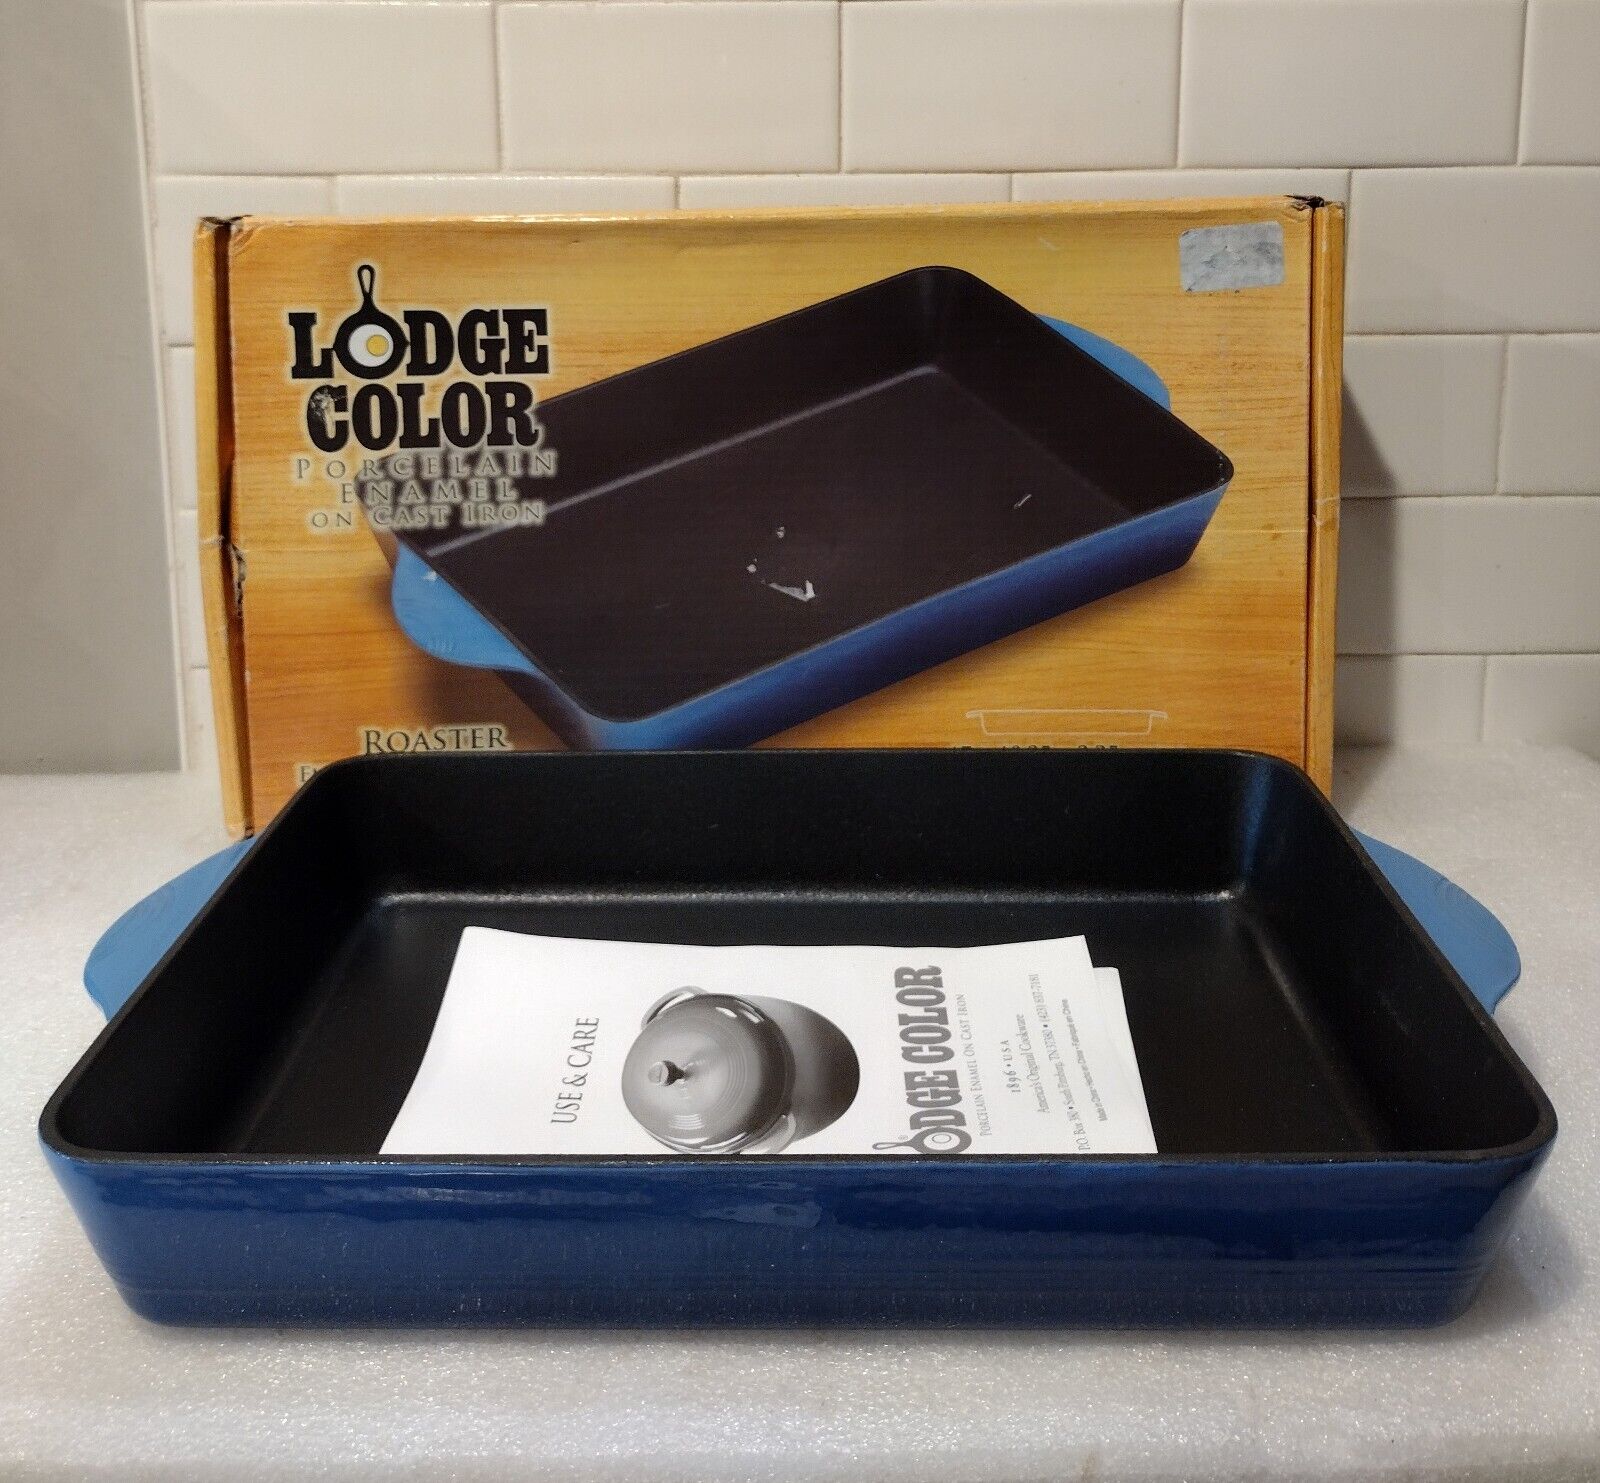 New Old Stock Lodge Blue Porcelain Enamel Cast Iron Roaster 17x10.25x2.25 inches